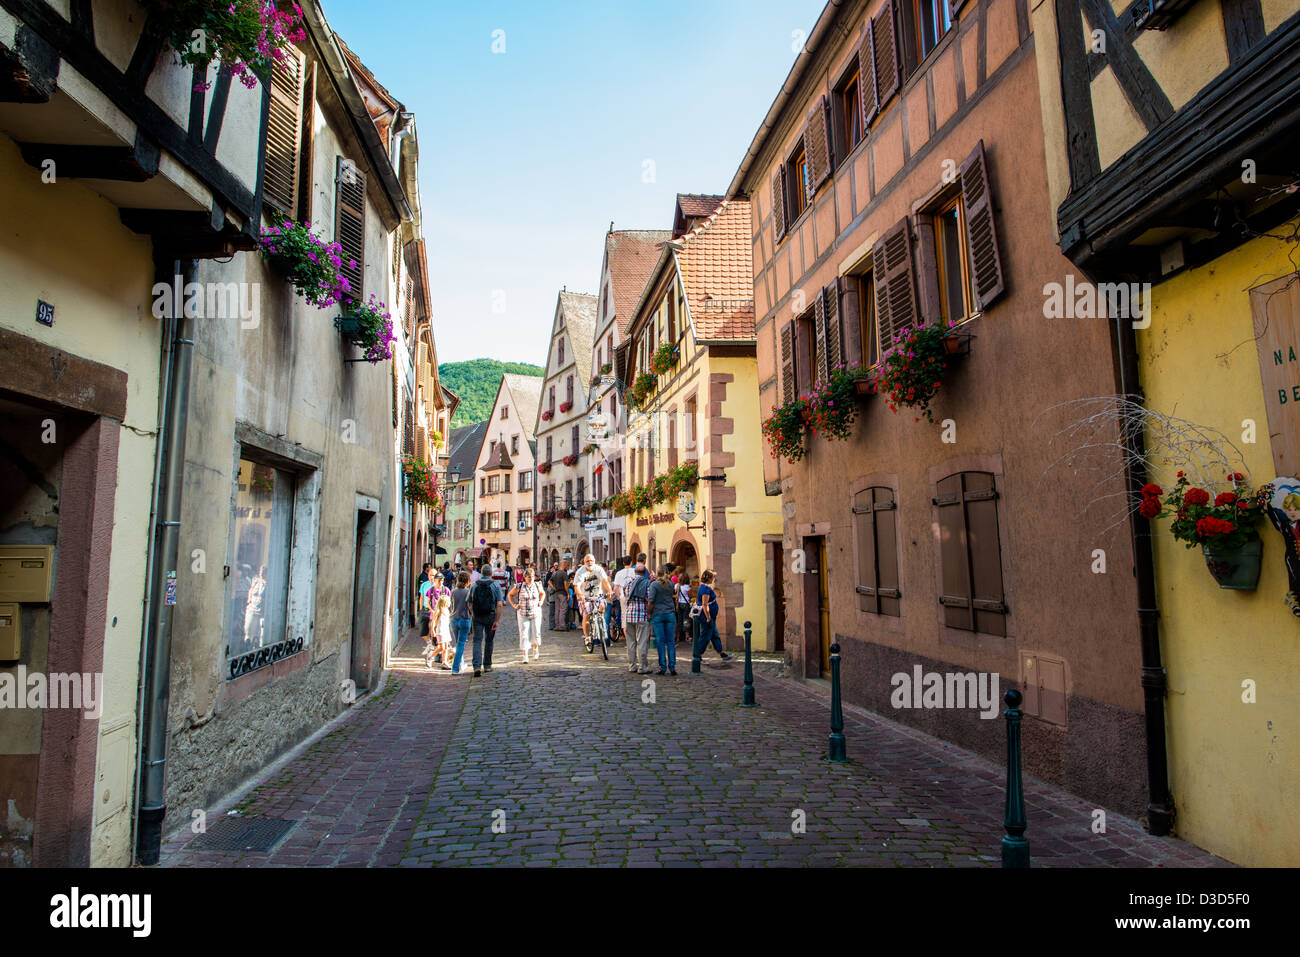 Streets of the old city center of Kaysersberg, Haut-Rhin, Alsace, France Stock Photo